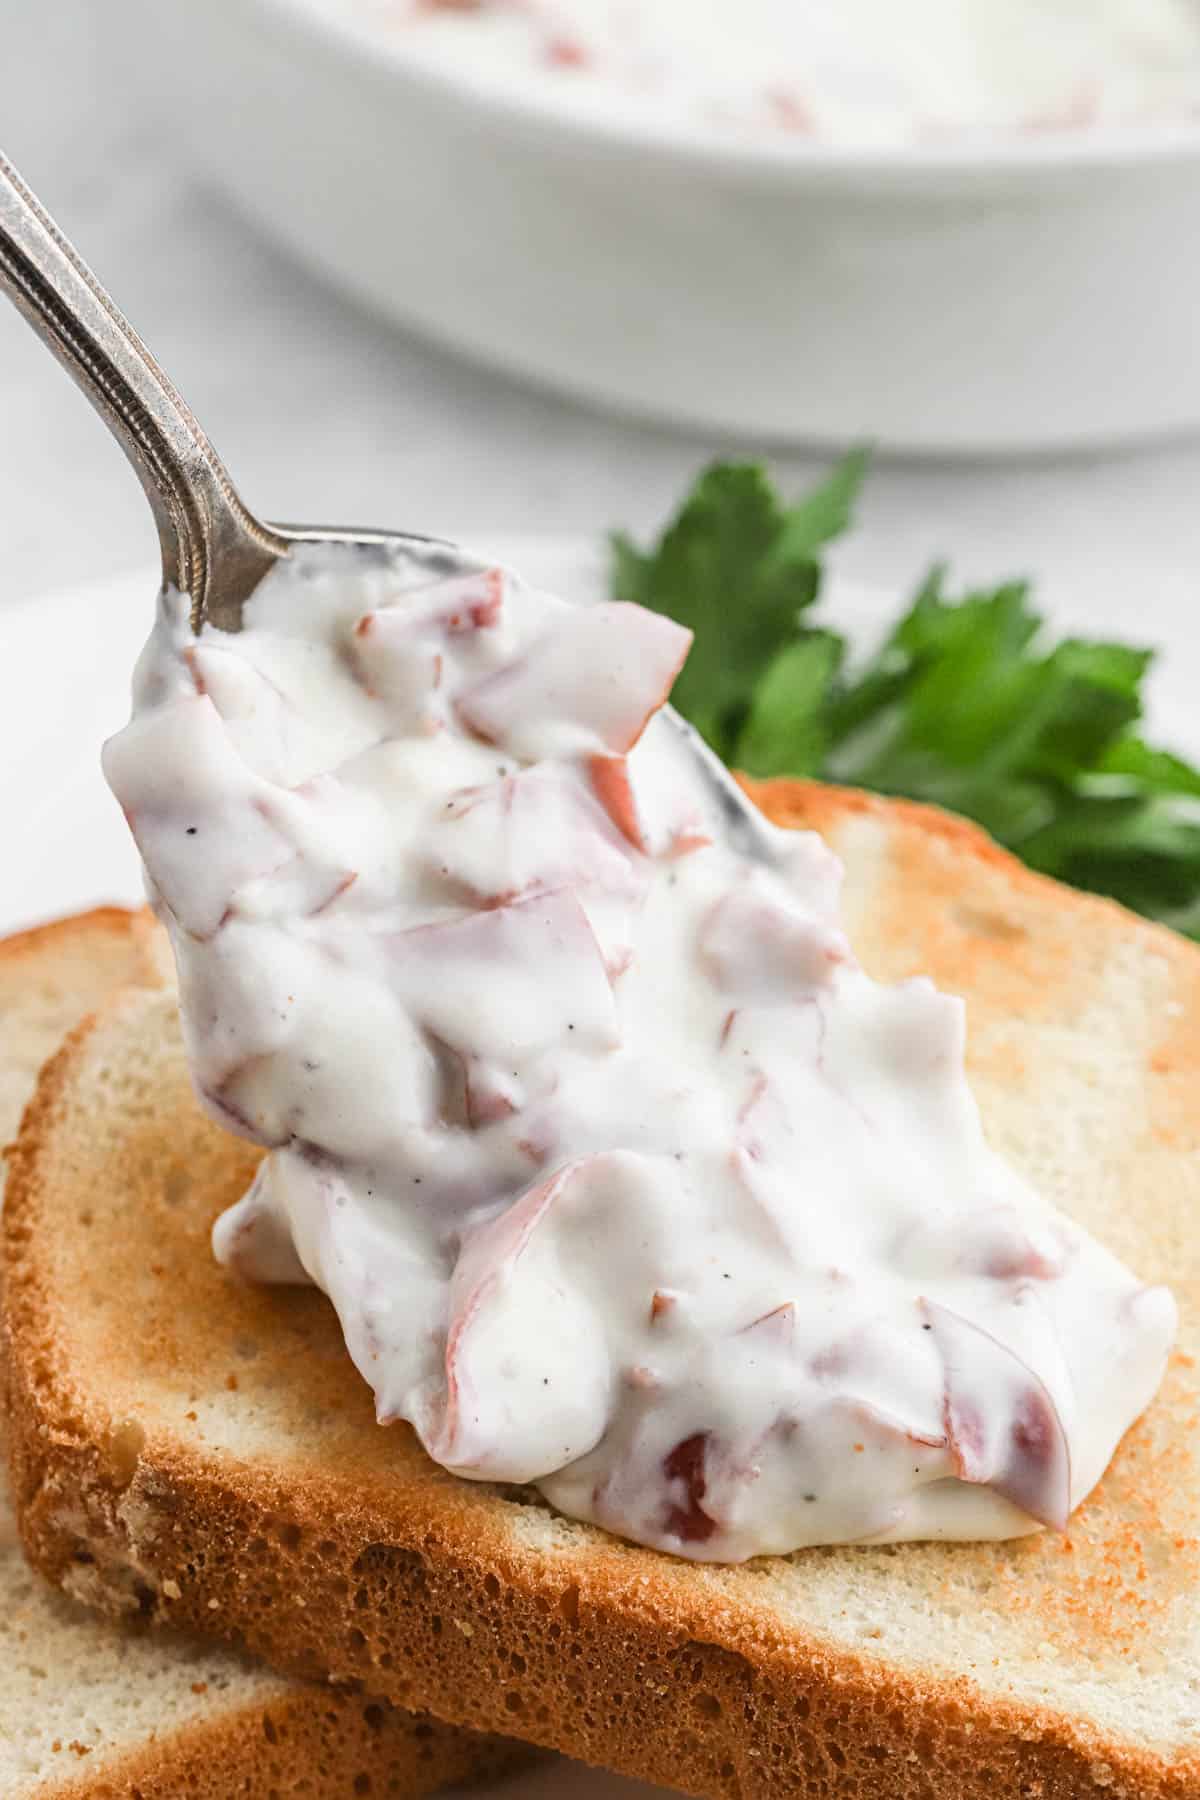 Metal spoon serving chipped beef gravy on toast